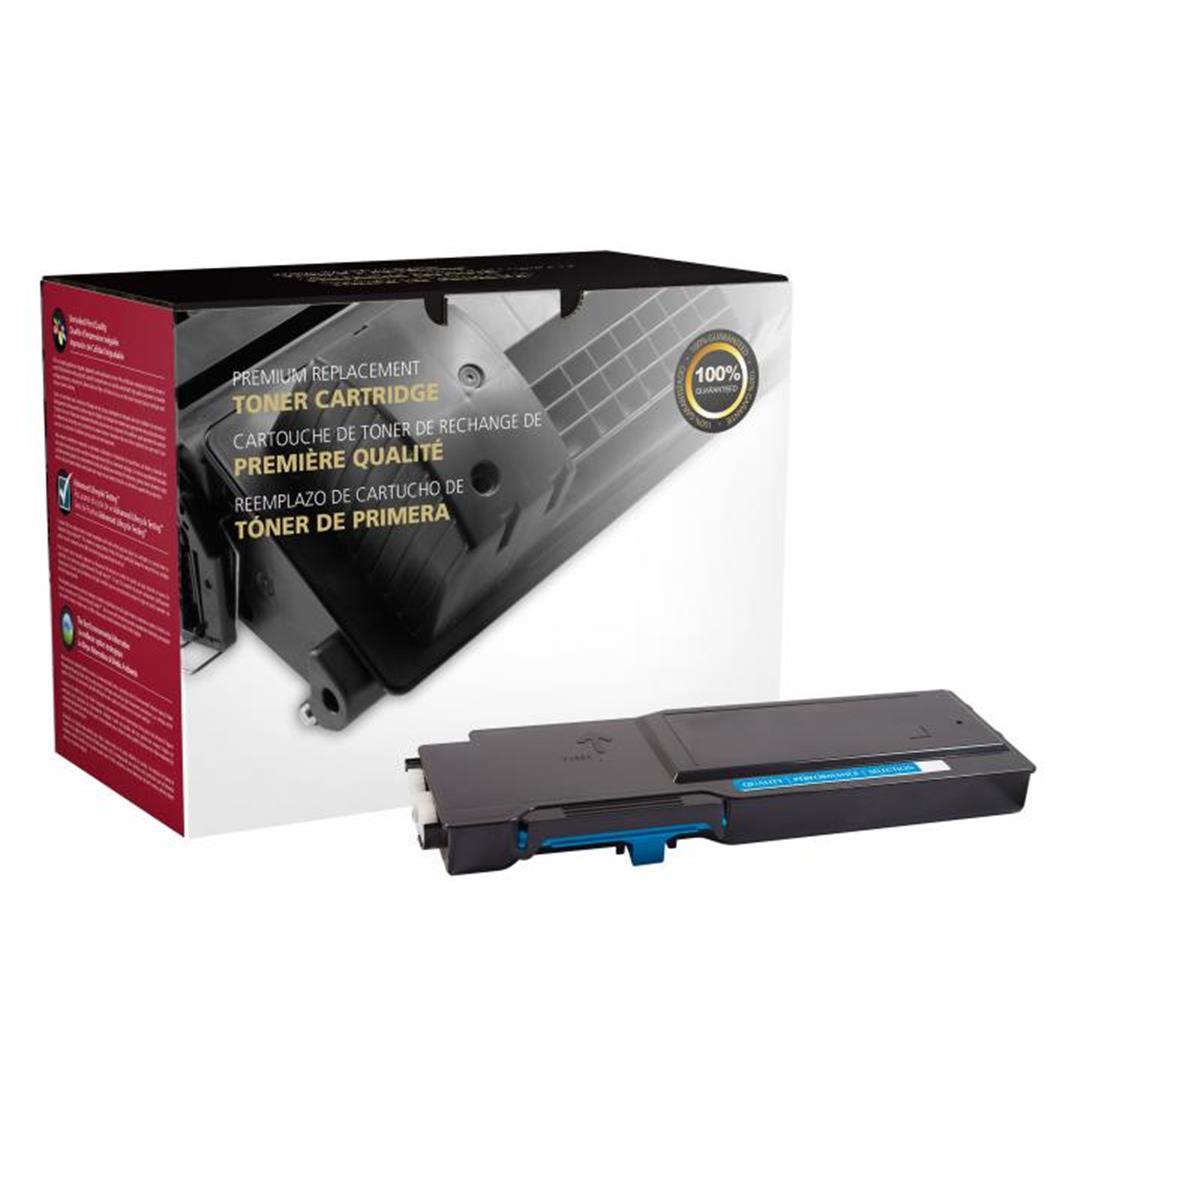 Picture of Dell 200811 High Yield Cyan Toner Cartridge for Dell C2660